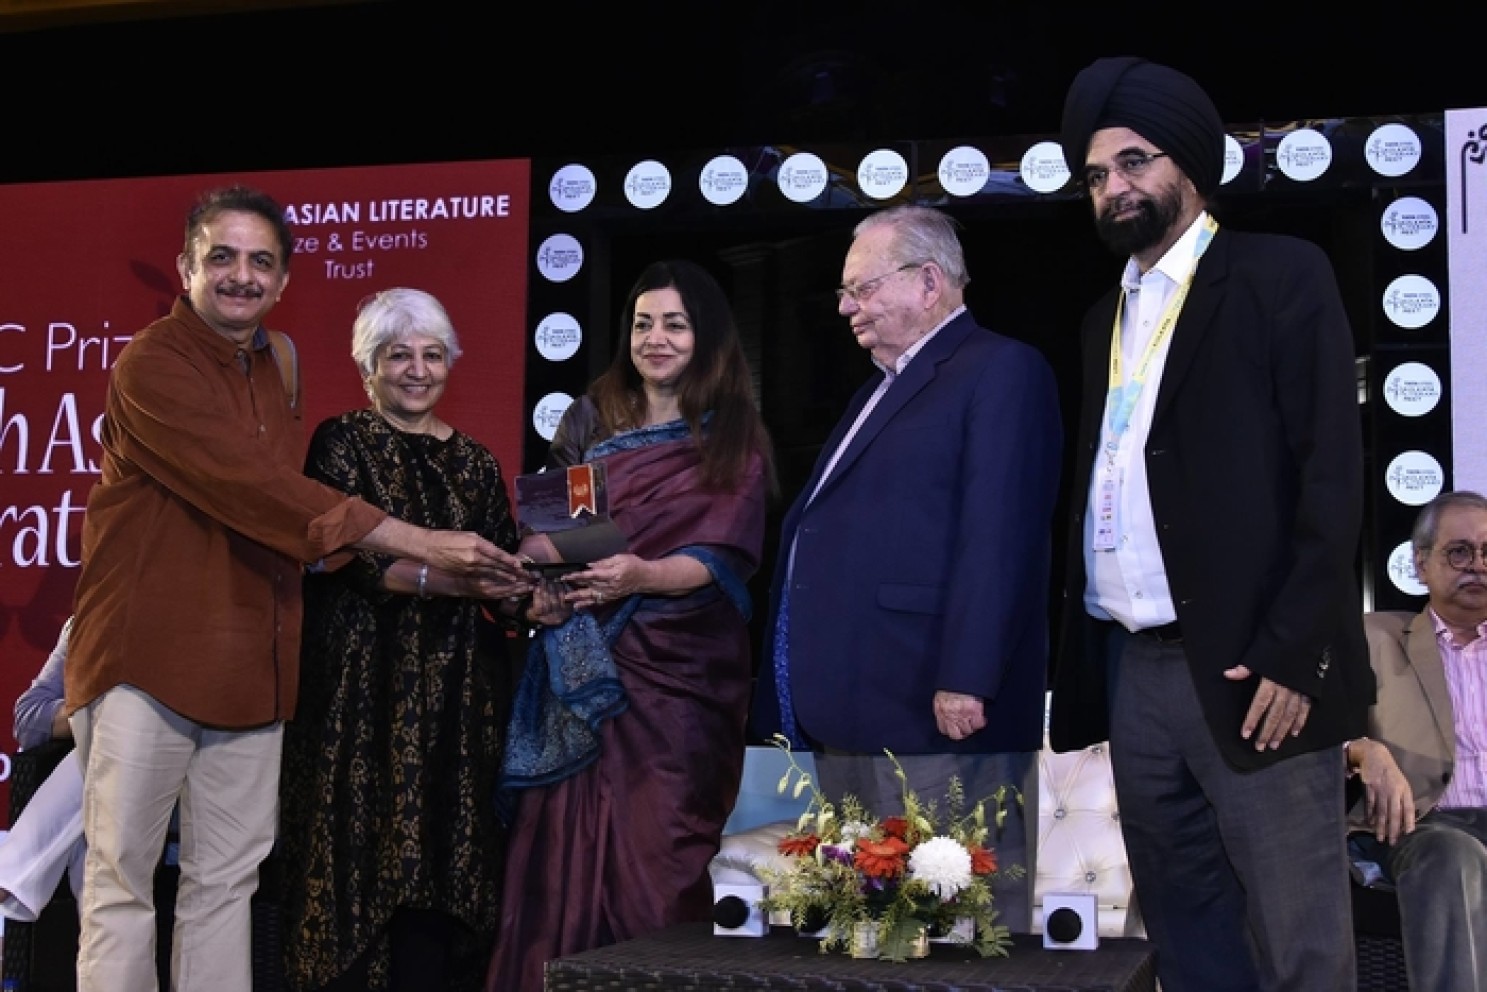 Prof Tejaswini NIRANJANA (2nd left) receives the DSC Prize for South Asian Literature 2018 in India.